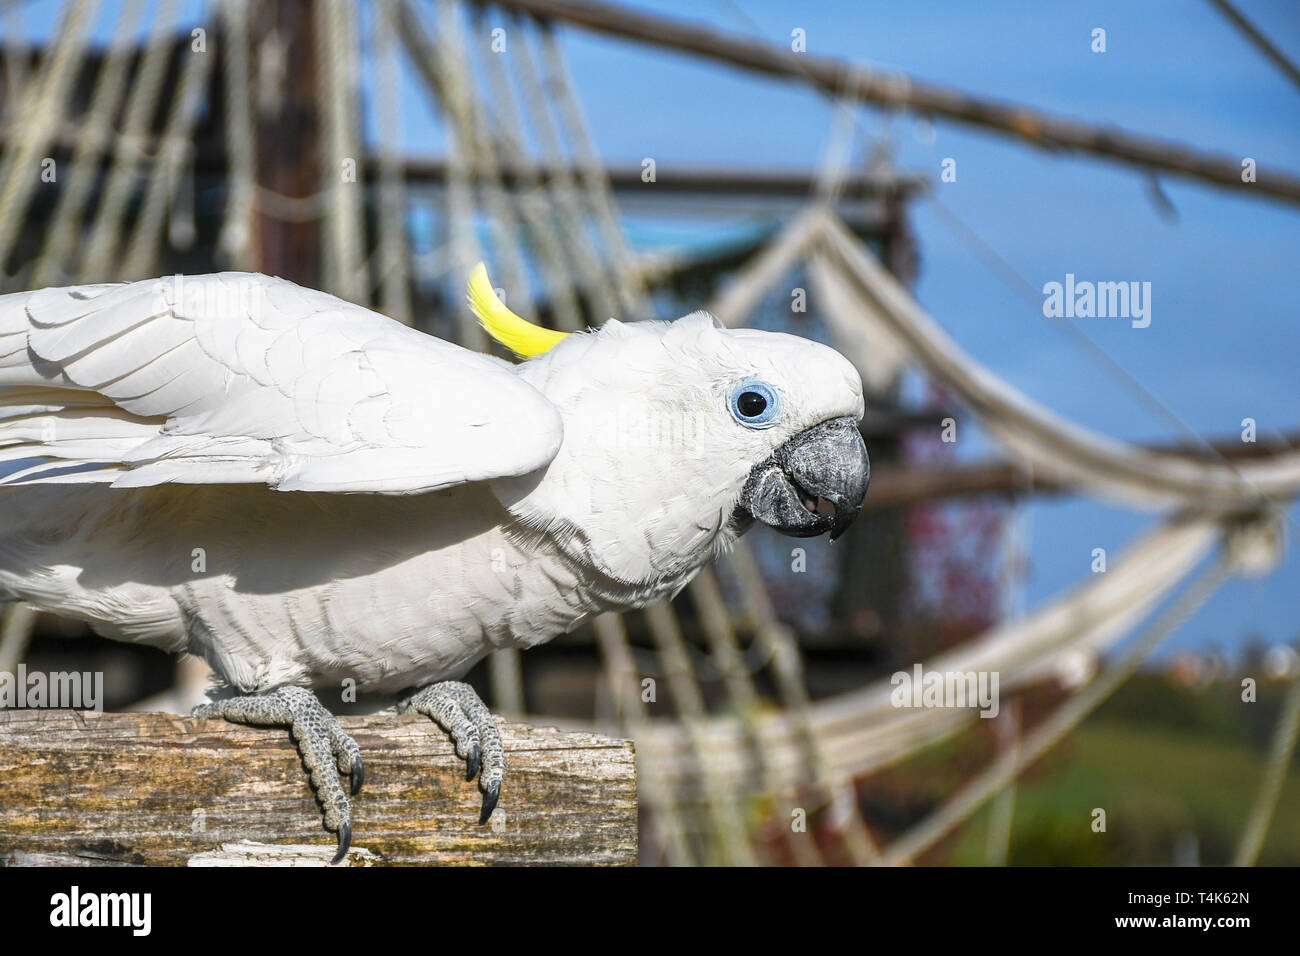 White yellow crested Cockatoo, Cacatua galerita, standing on an old wooden pirate boat Stock Photo